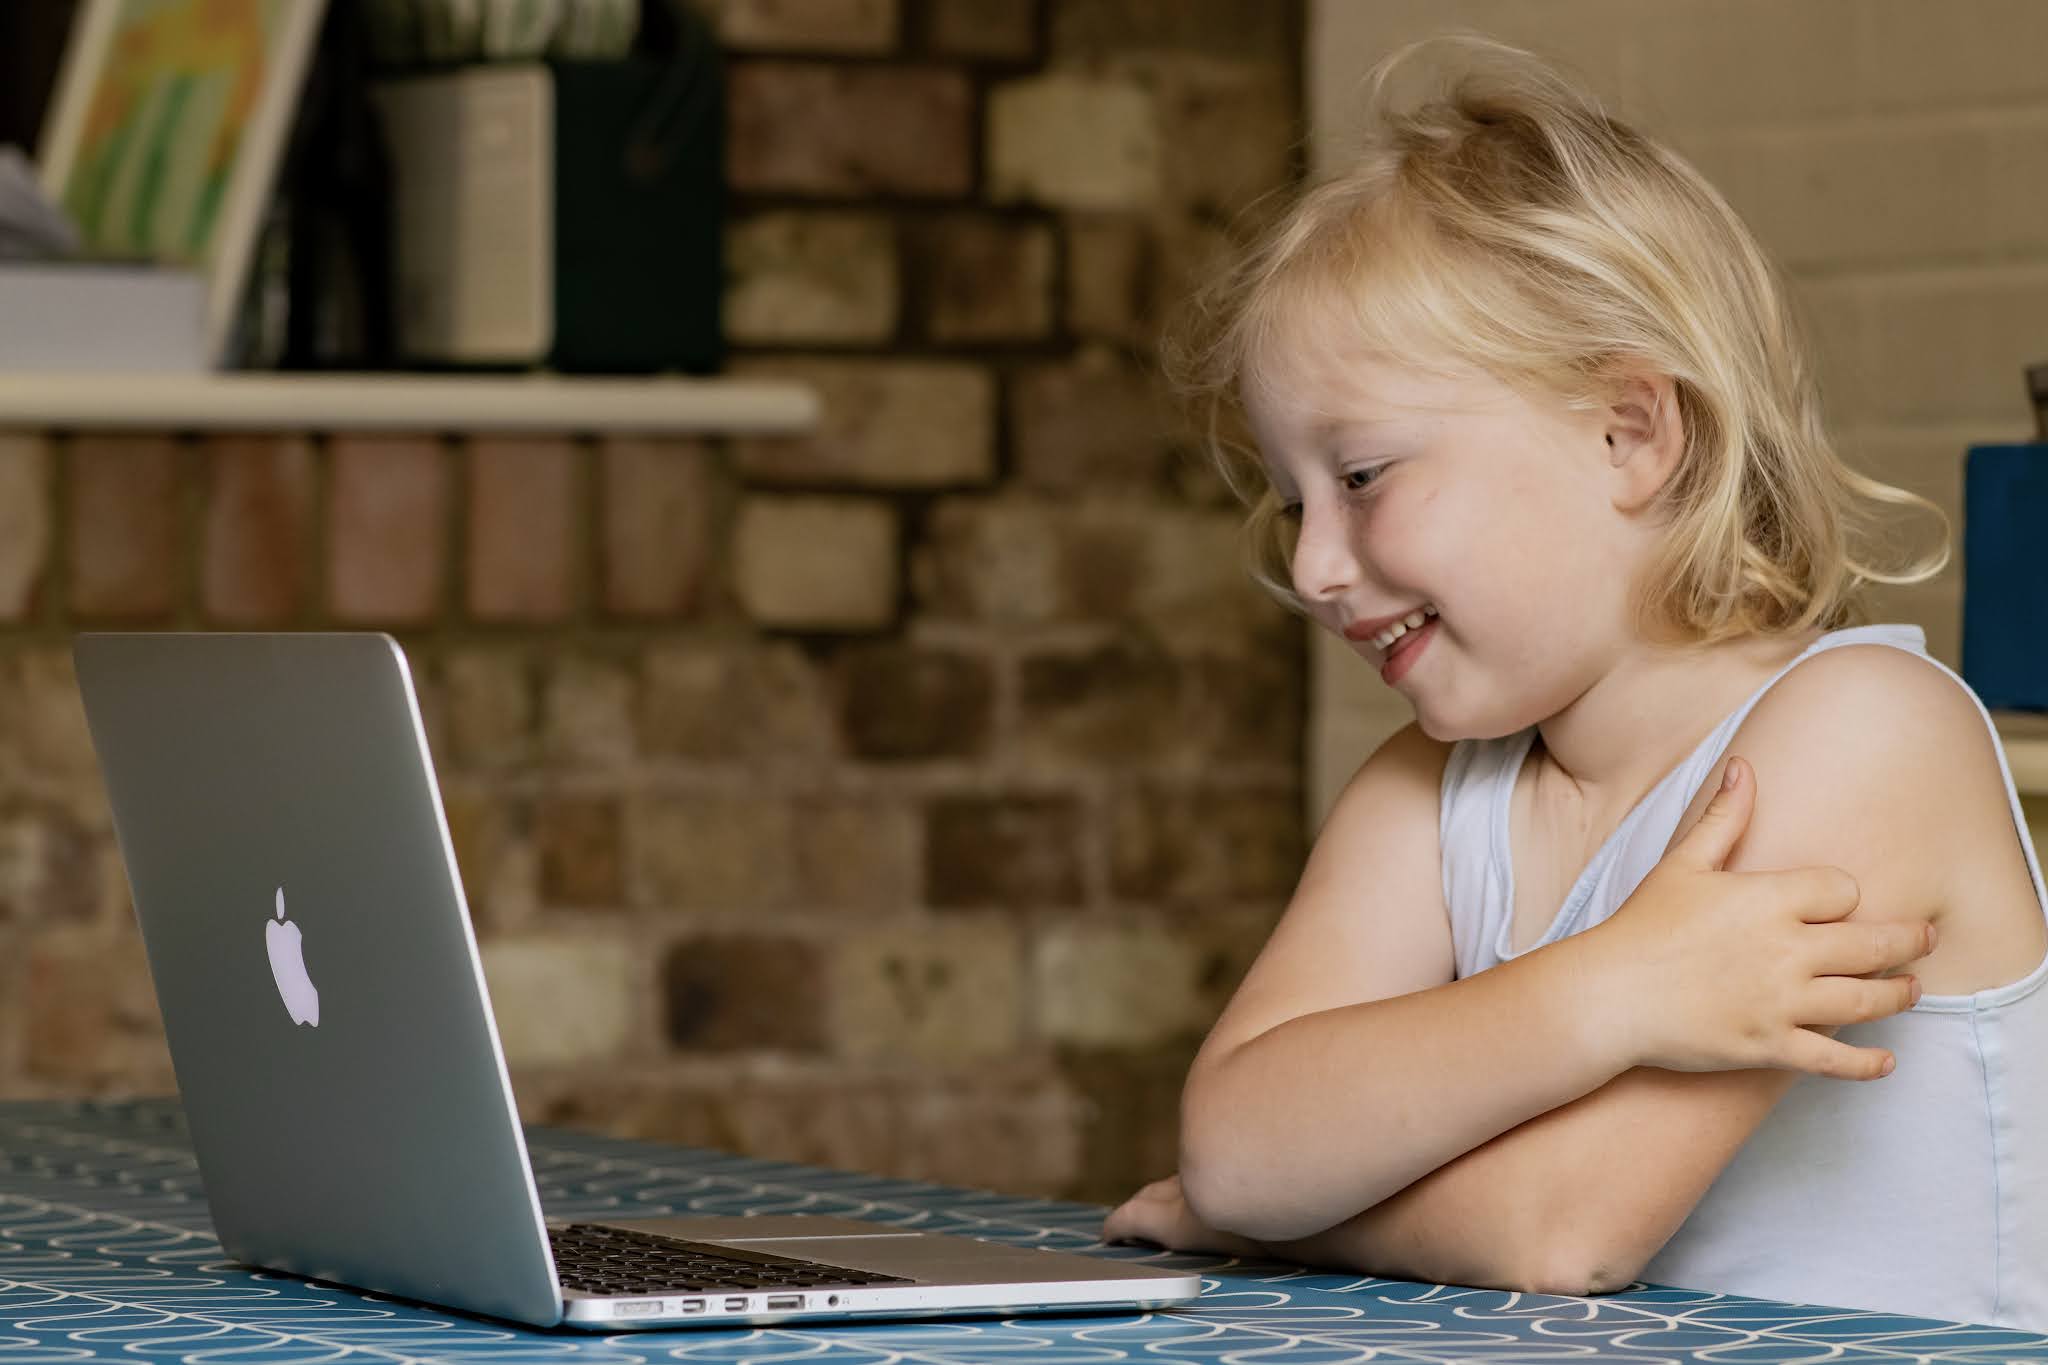 A EYFS Key stage 1 primary age girl smiling at a laptop during an online tutoring session